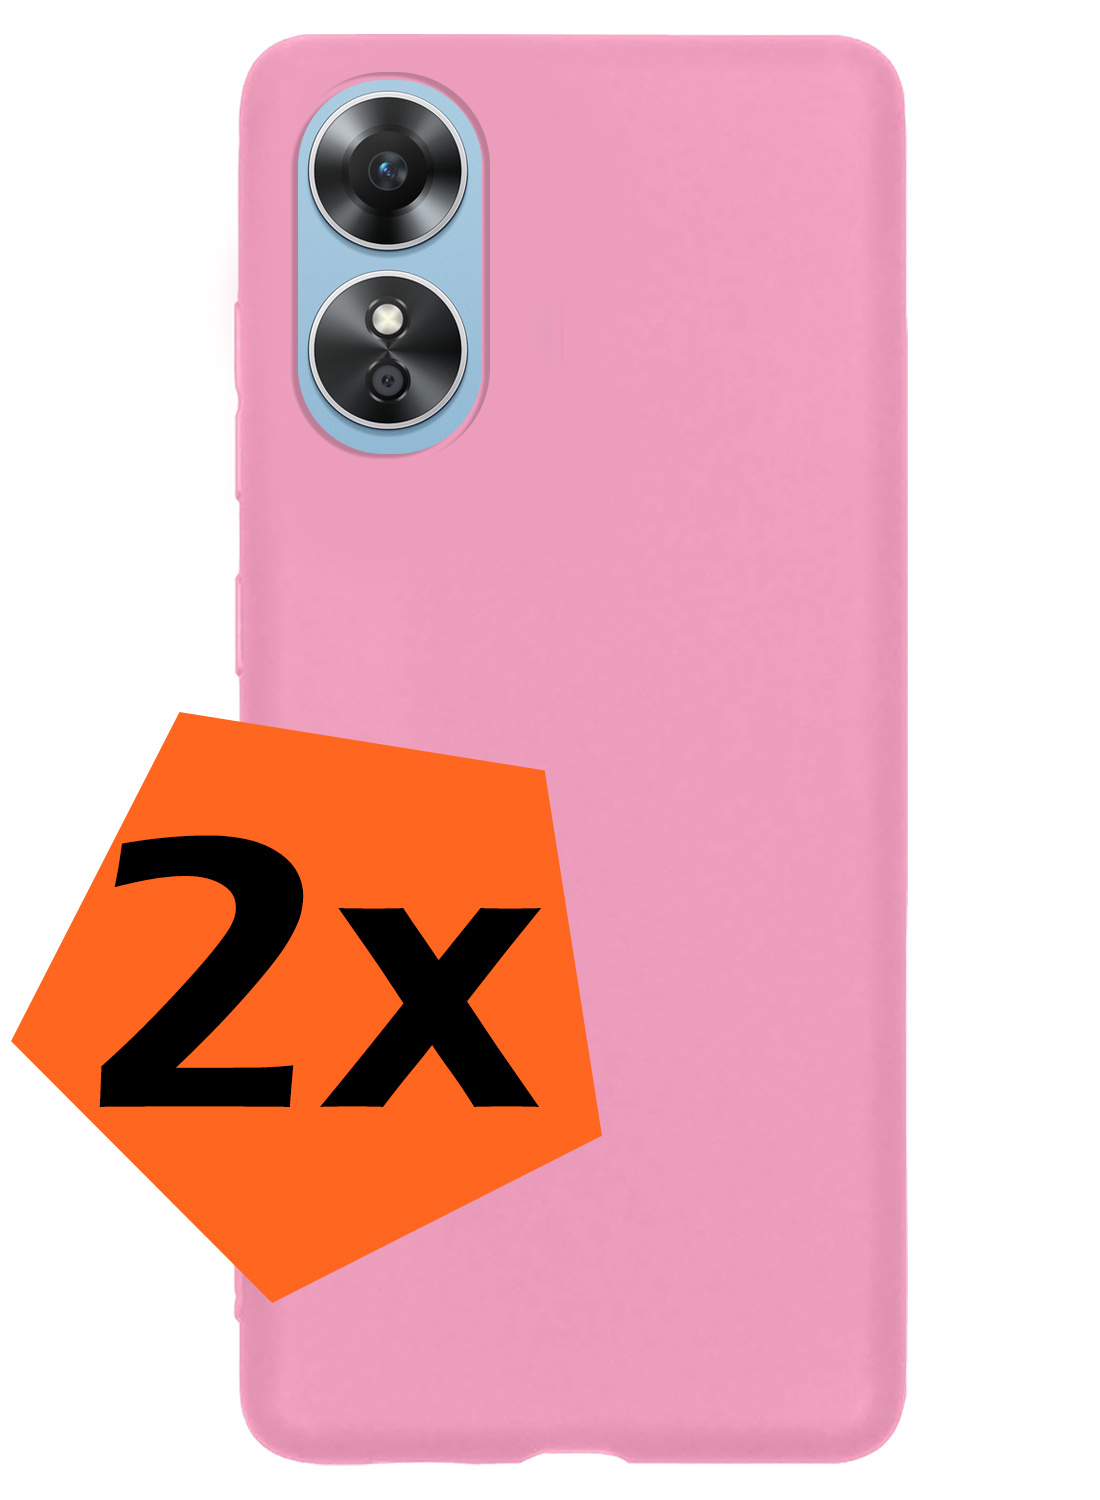 Nomfy OPPO A17 Hoesje Siliconen Case Back Cover - OPPO A17 Hoes Cover Silicone - Licht Roze - 2X